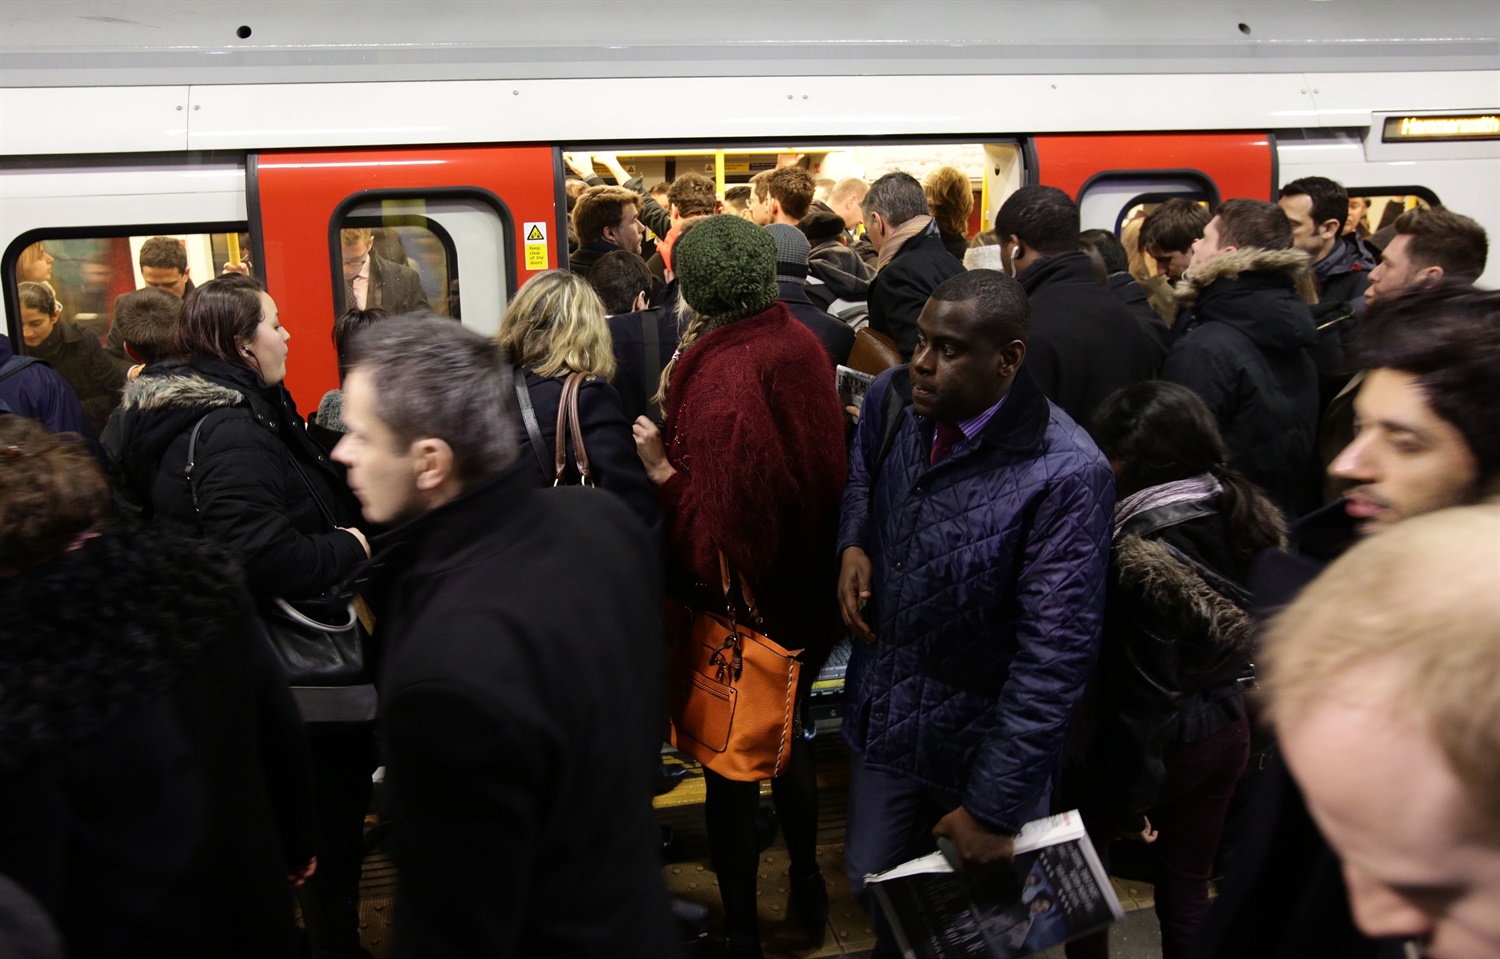 ‘Use retired workers to bust Tube strike’ – GLA Conservatives